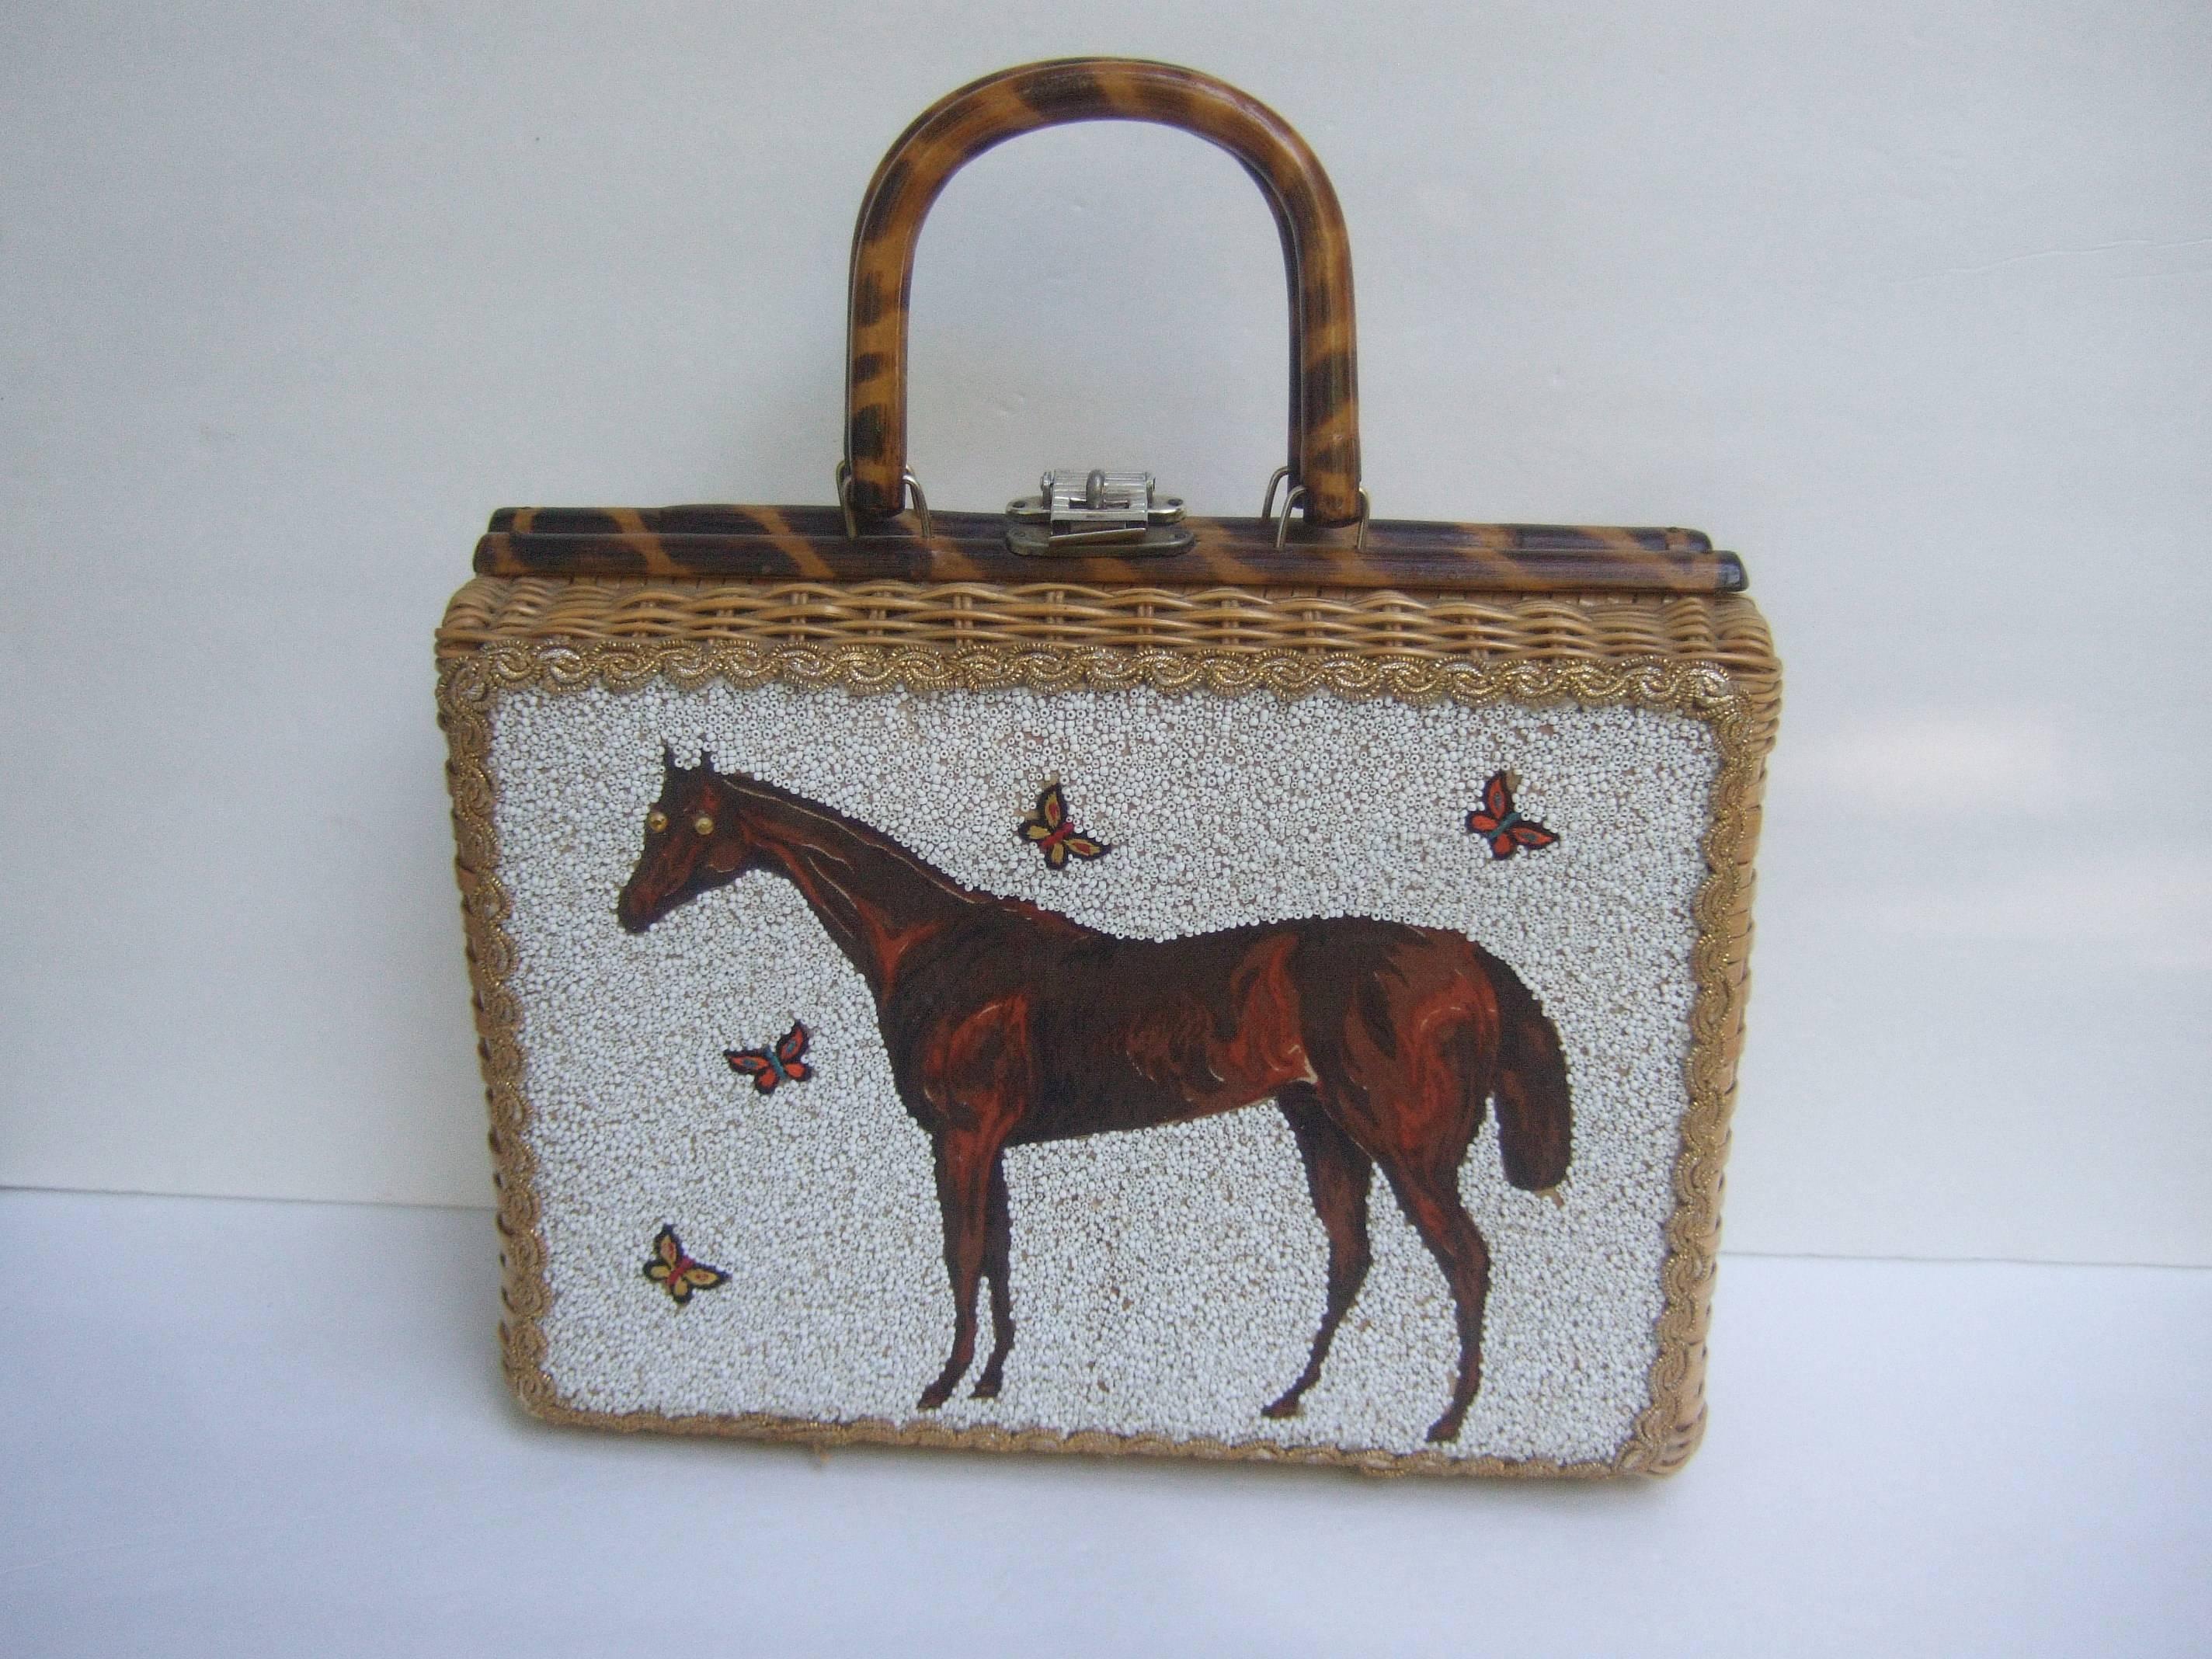 Glass beaded wicker horse theme handbag c 1960 
The stylish retro handbag is designed with
a brown cloth figure encrusted with small
contiguous white glass micro beads

The majestic horse figure is surrounded 
by a series of small applique